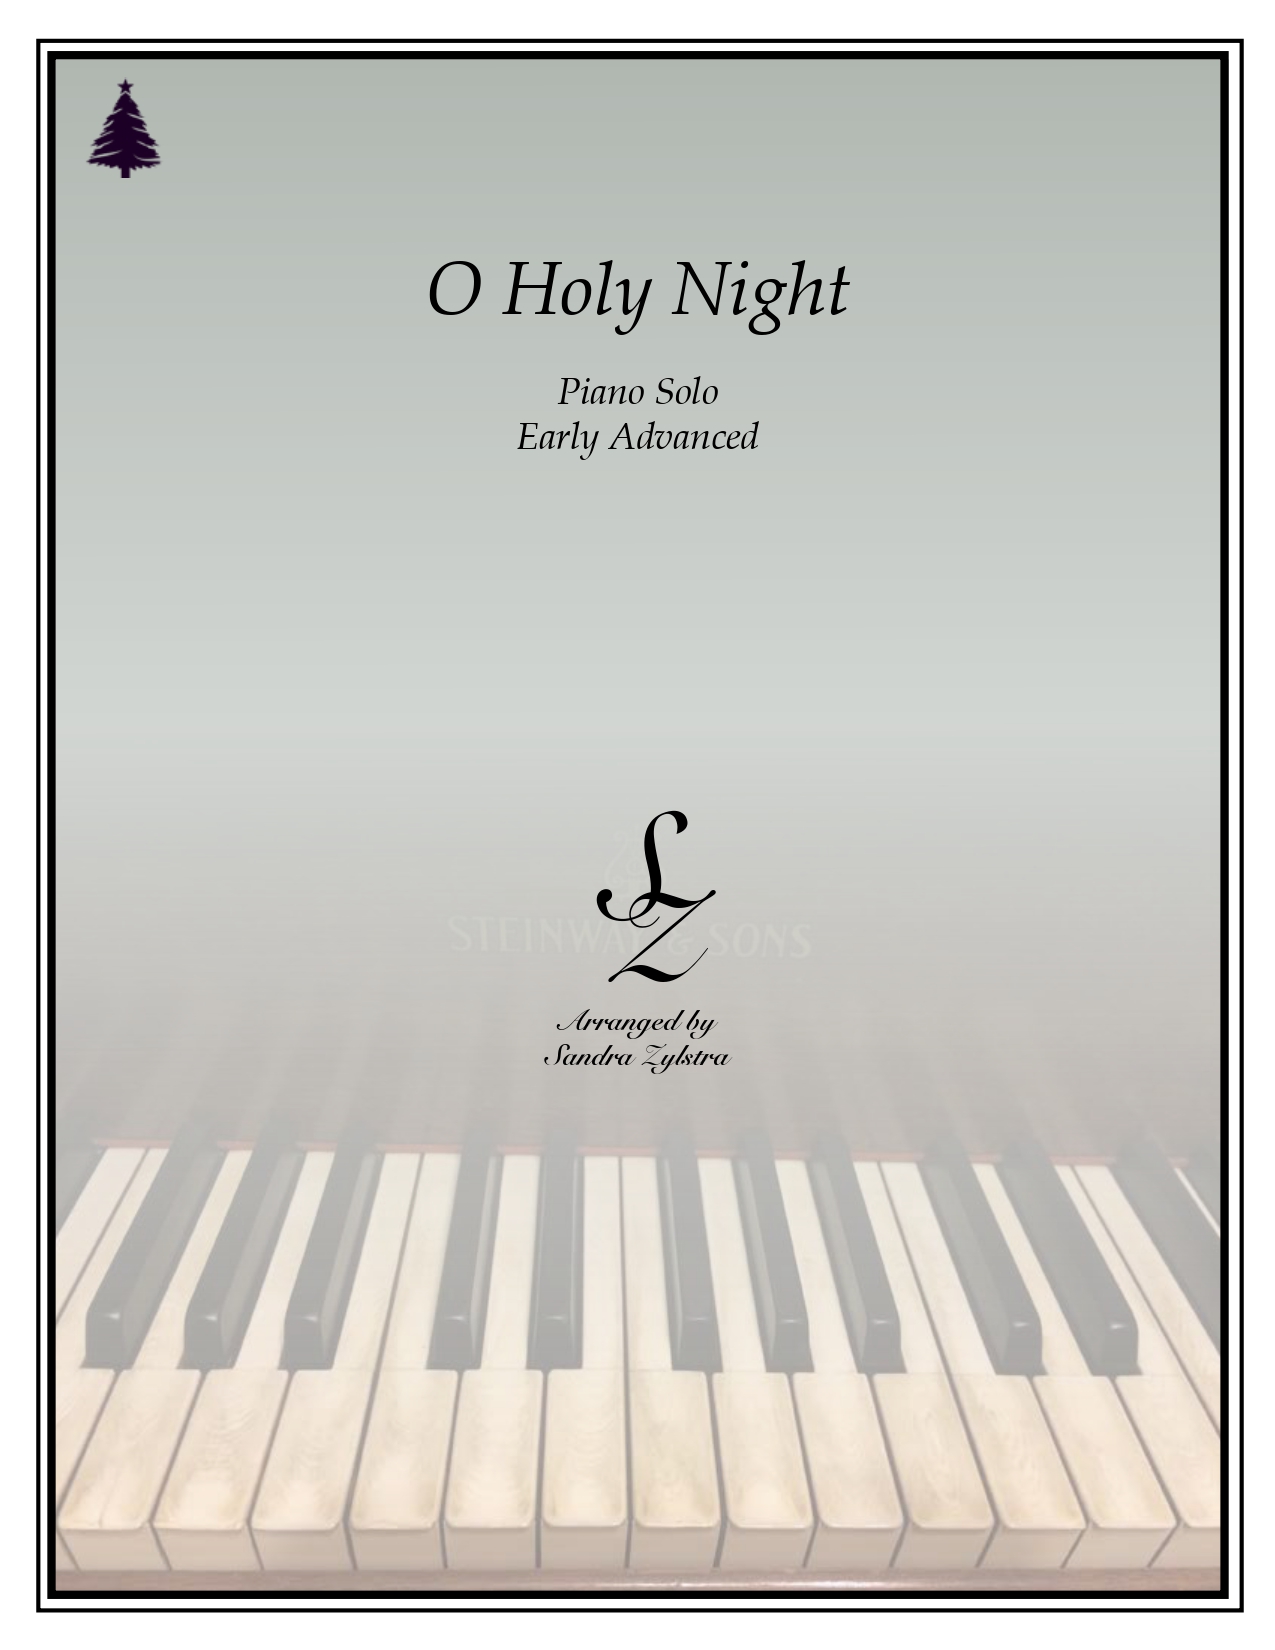 O Holy Night early advanced cover page 00011